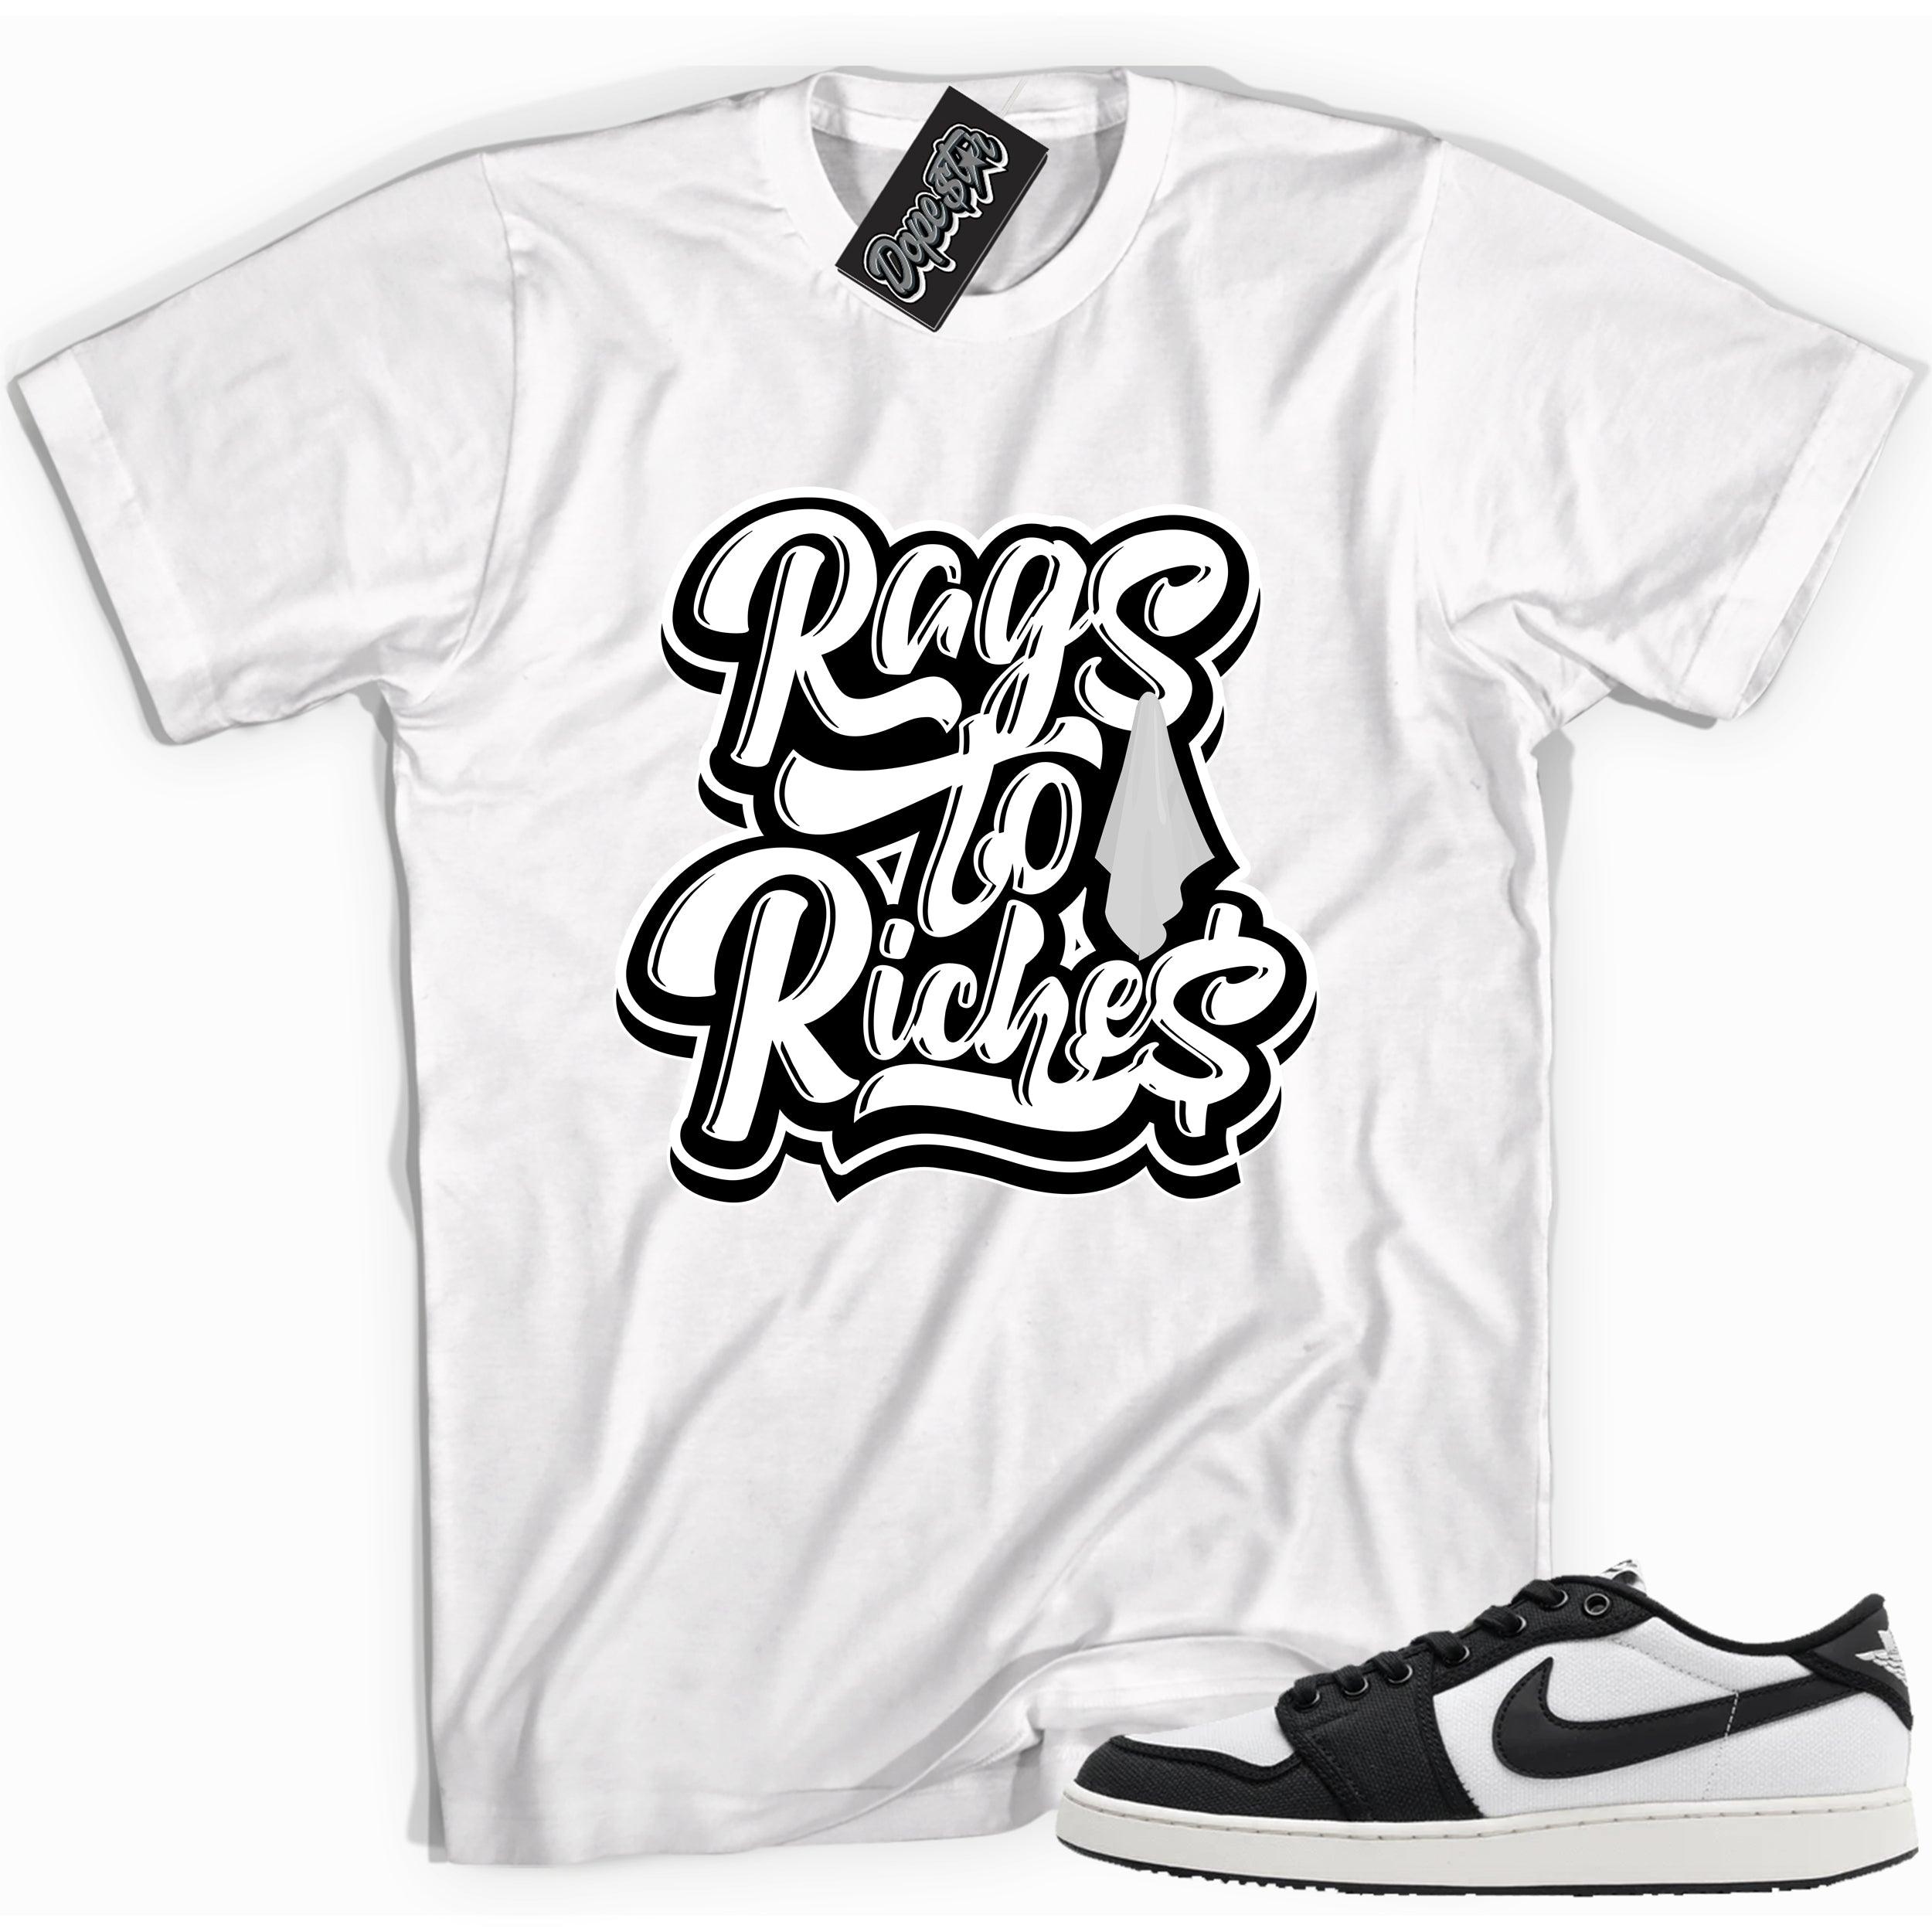 Cool white graphic tee with 'rags to riches' print, that perfectly matches Air Jordan 1 Retro Ajko Low Black & White sneakers.